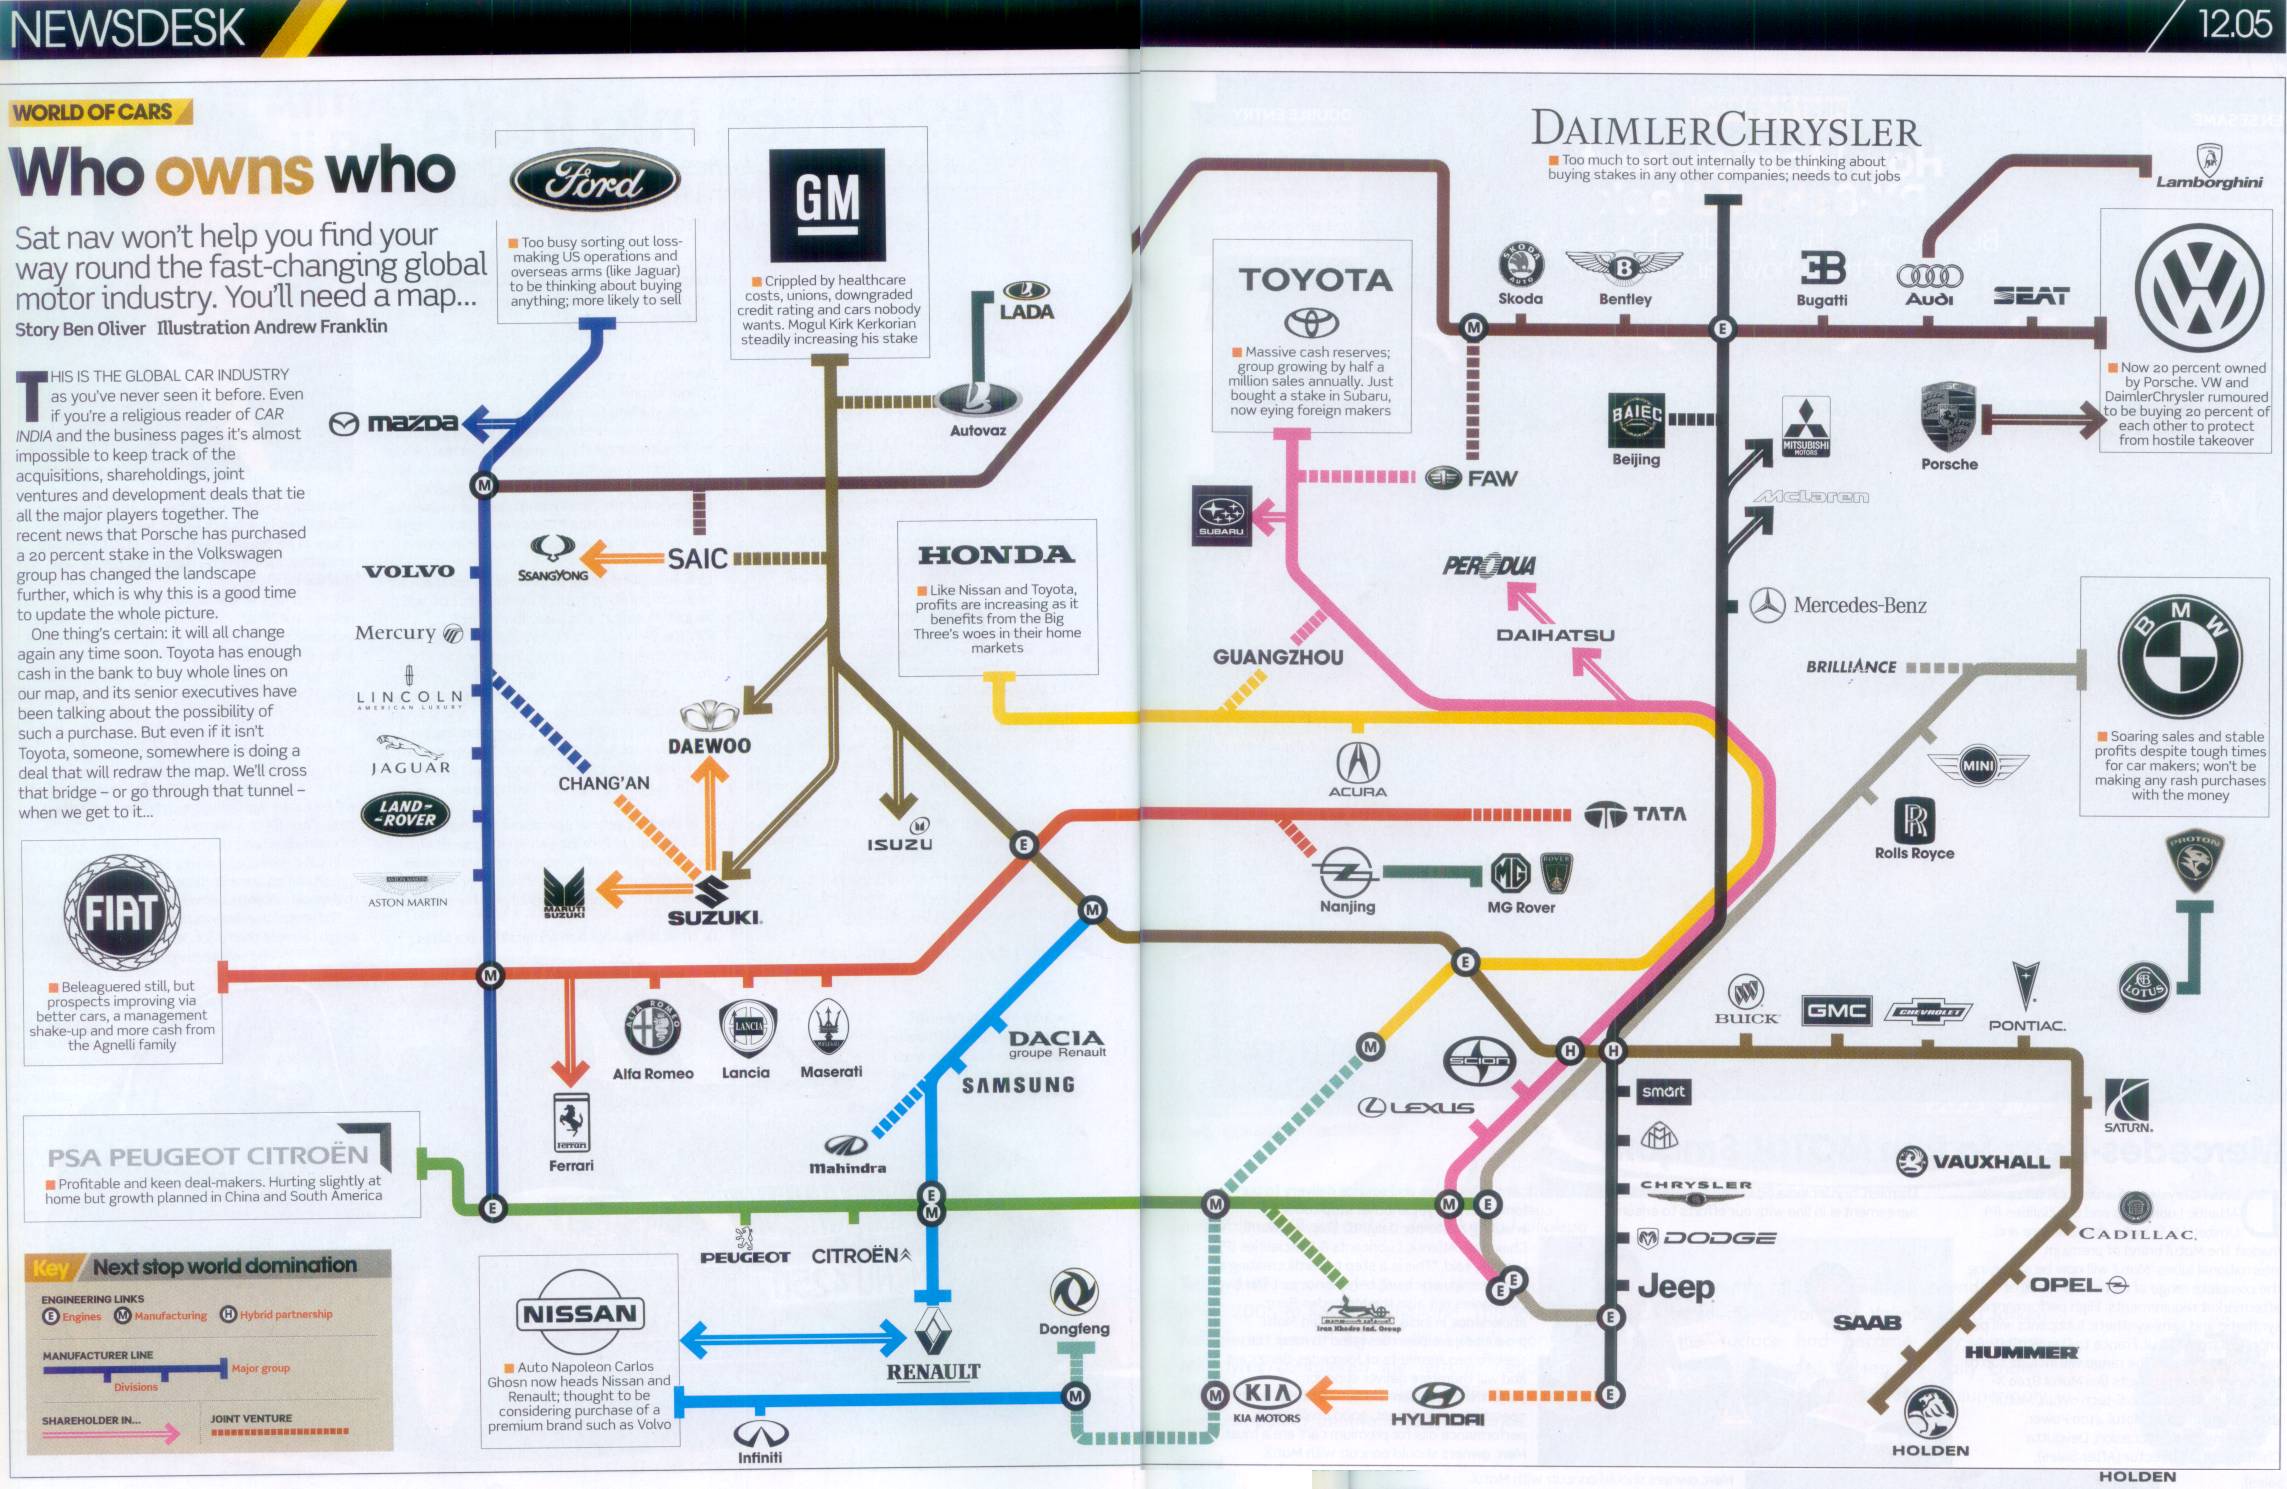 A chart showing which car companies own which